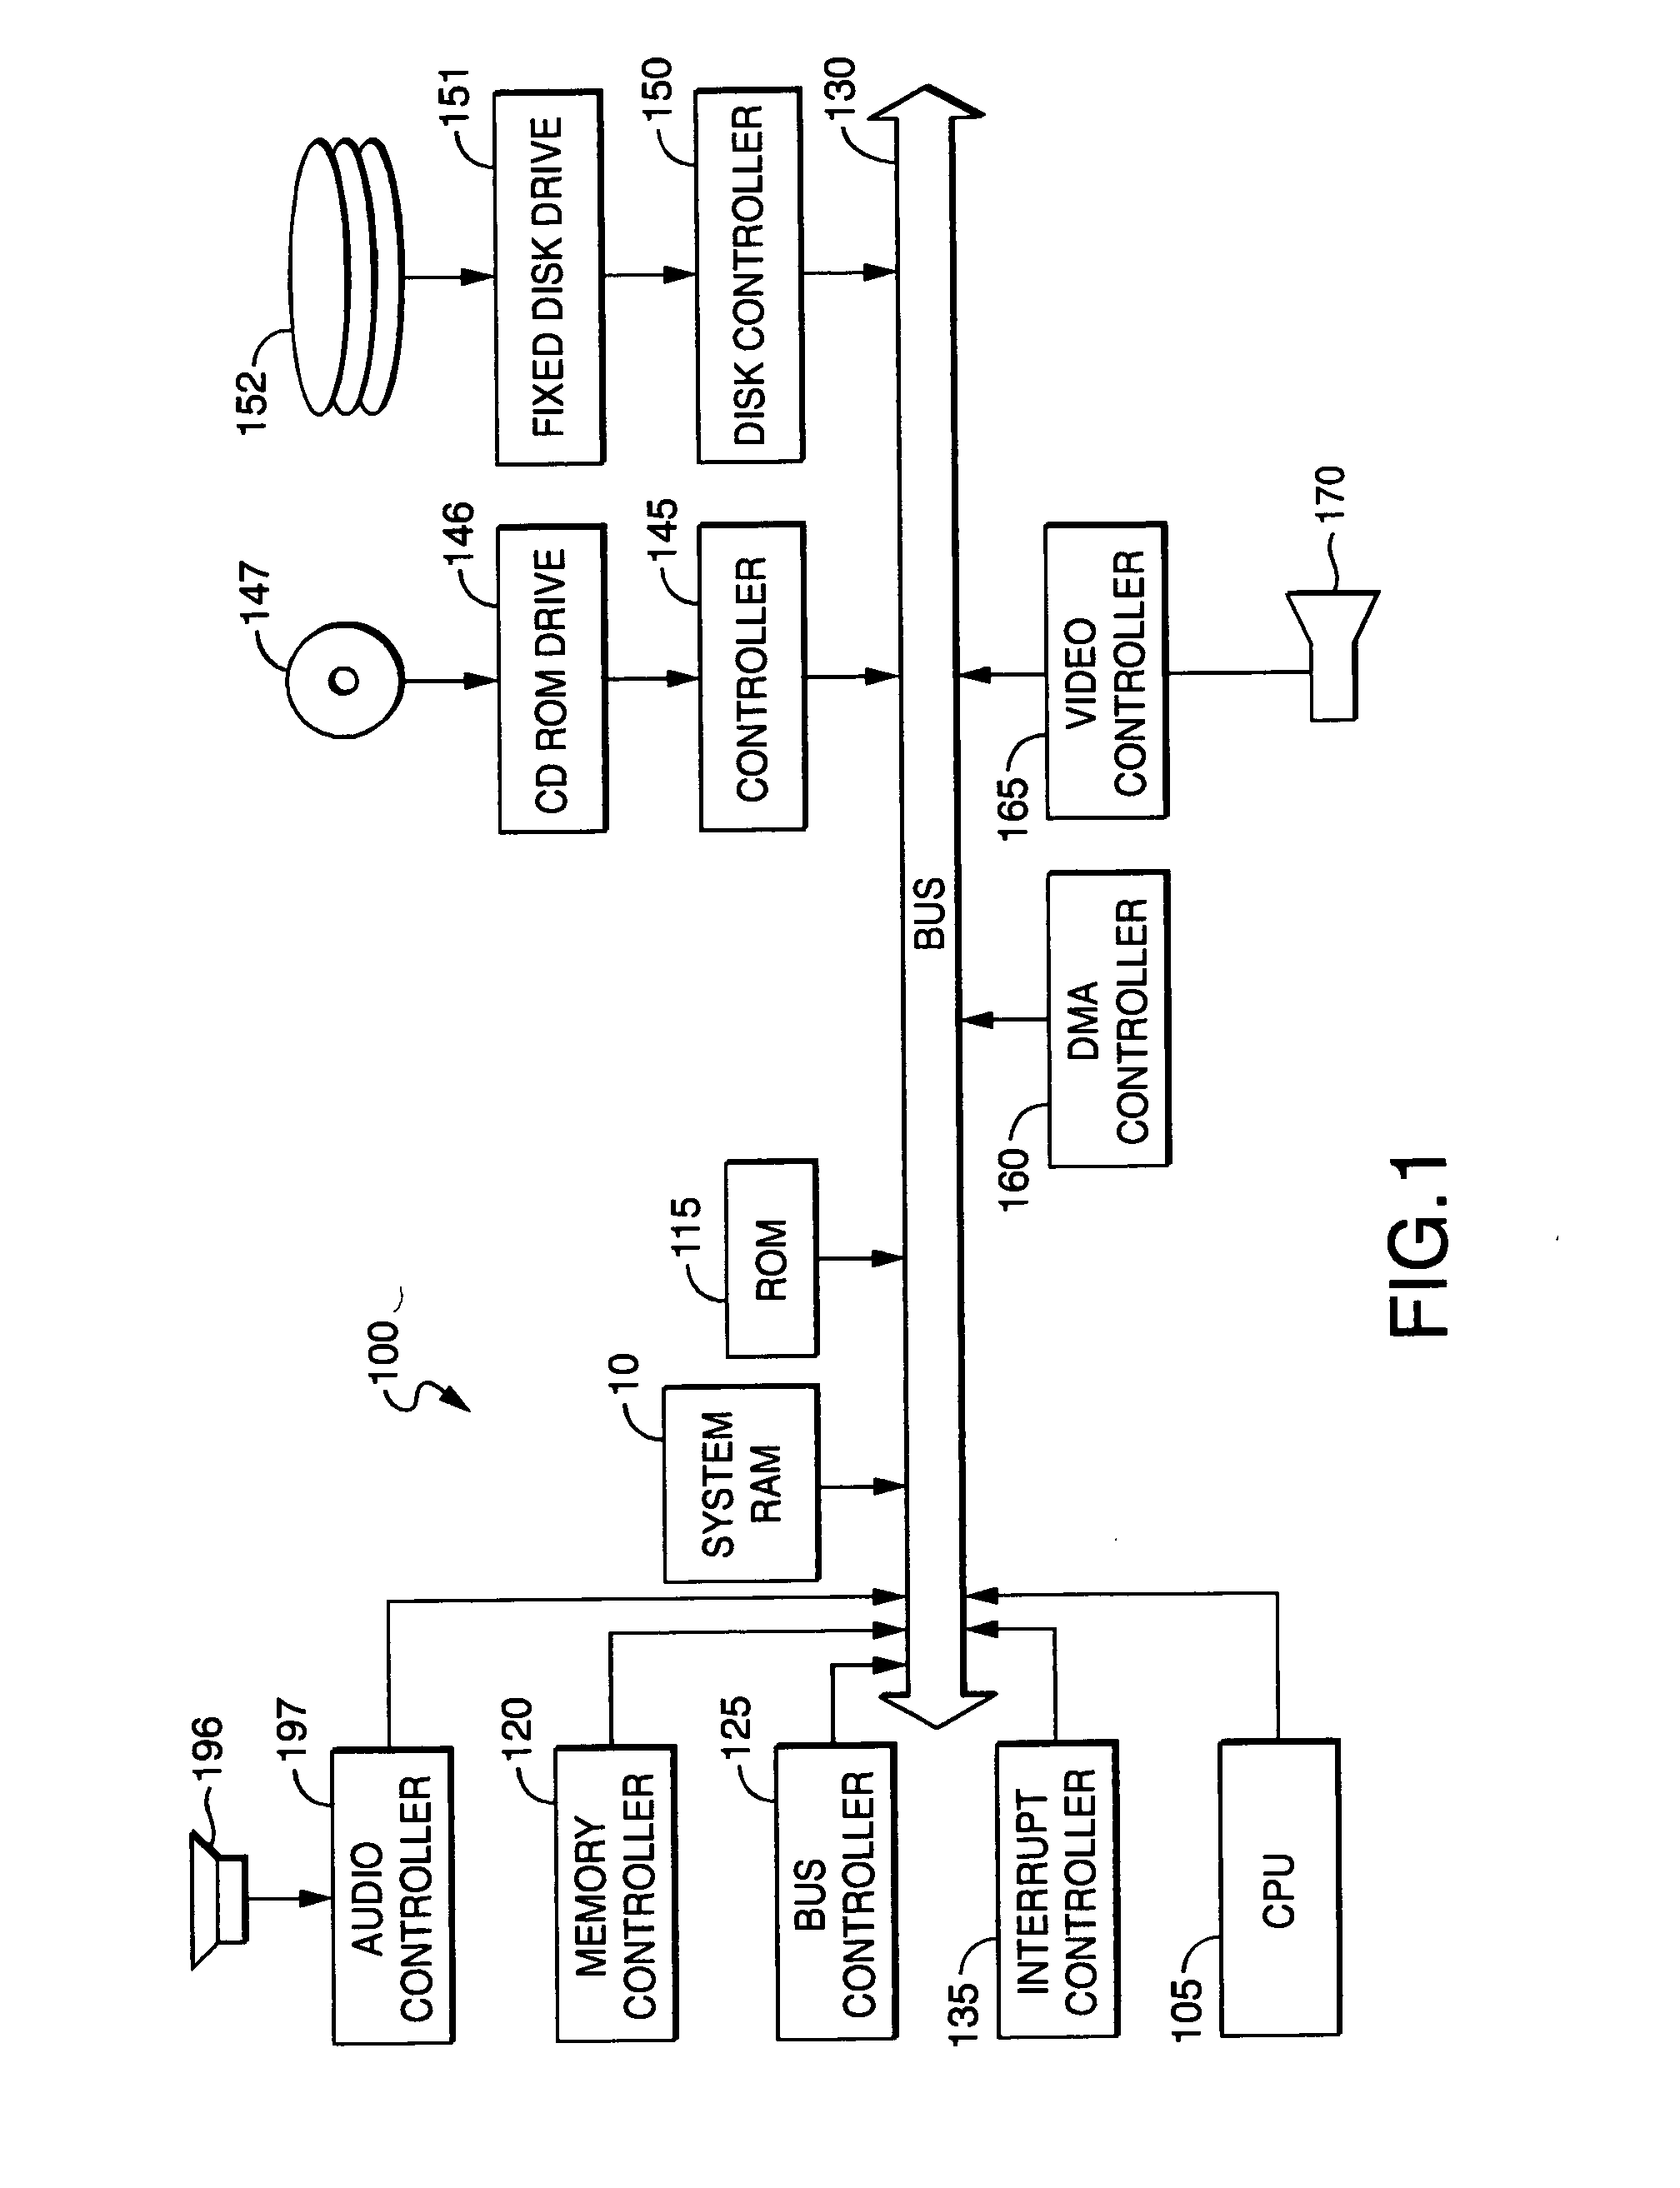 Apparatus and method for guided tour